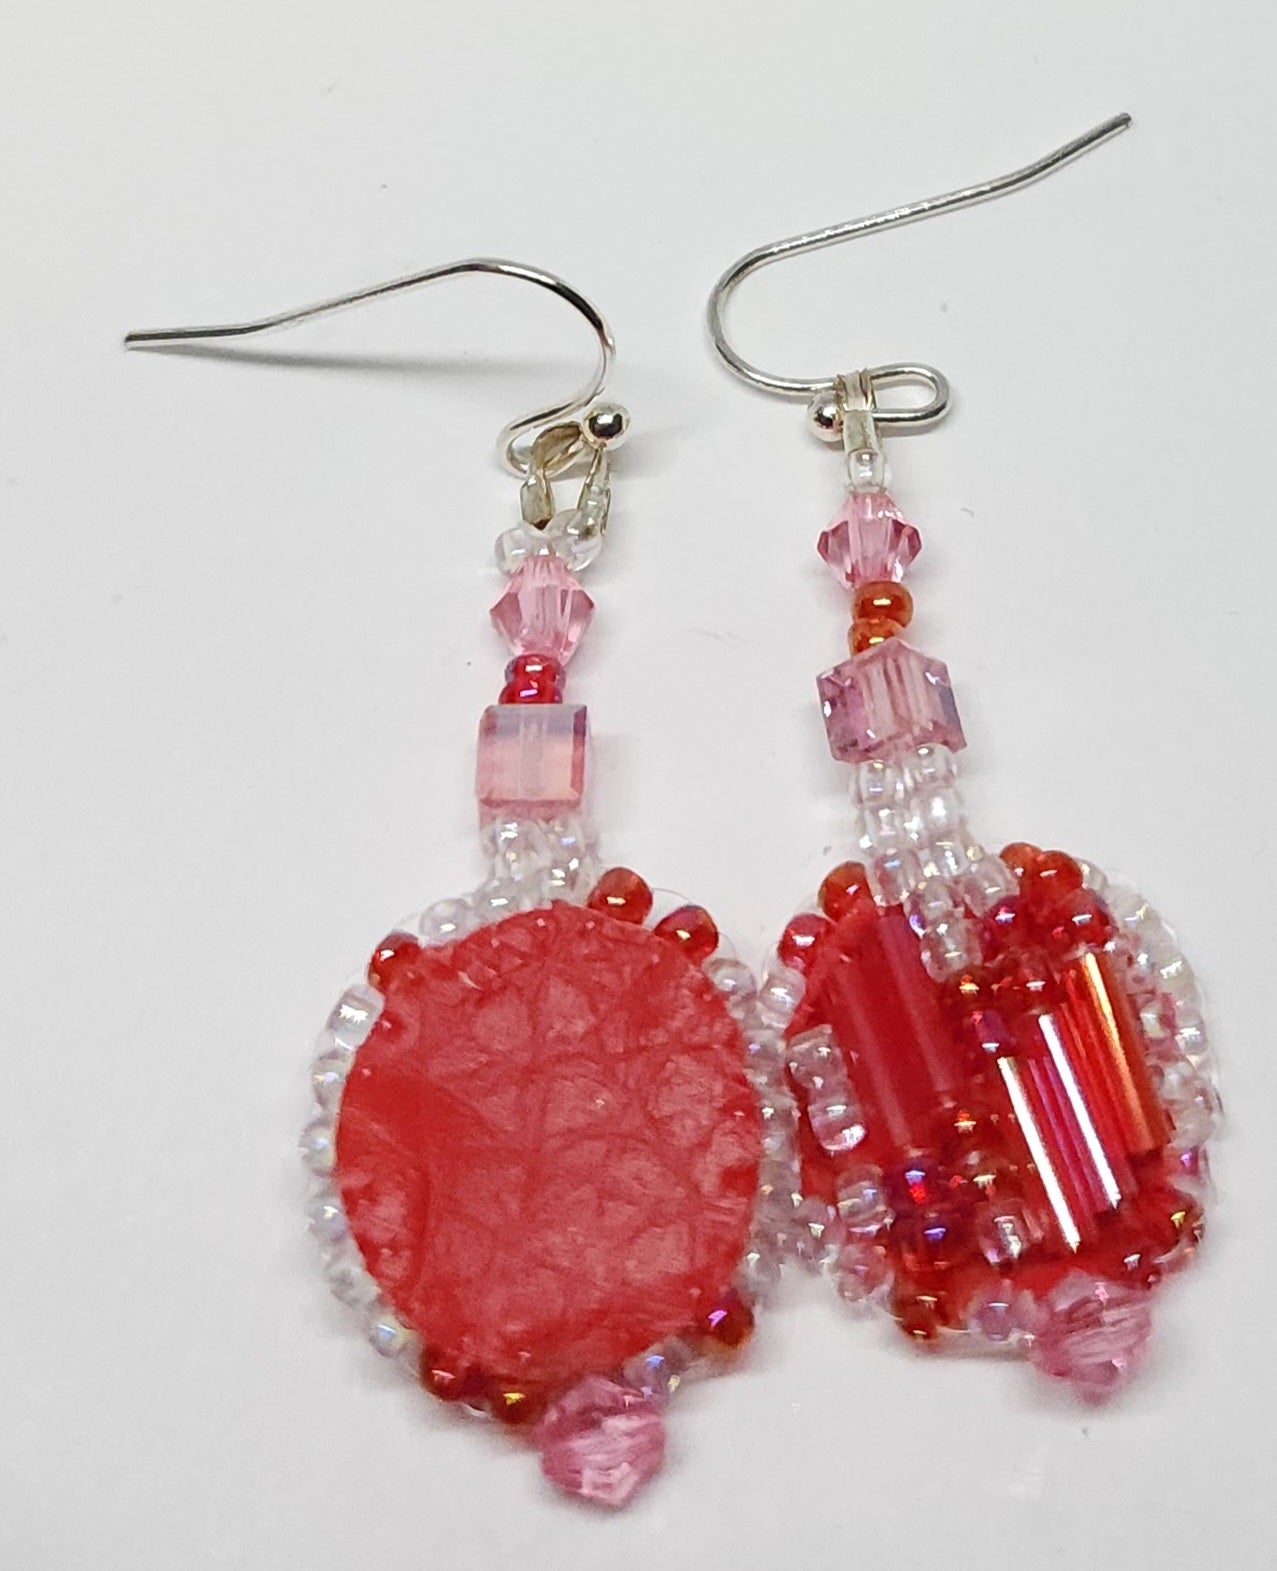 Red & White Dangles with Nickel-free hooks